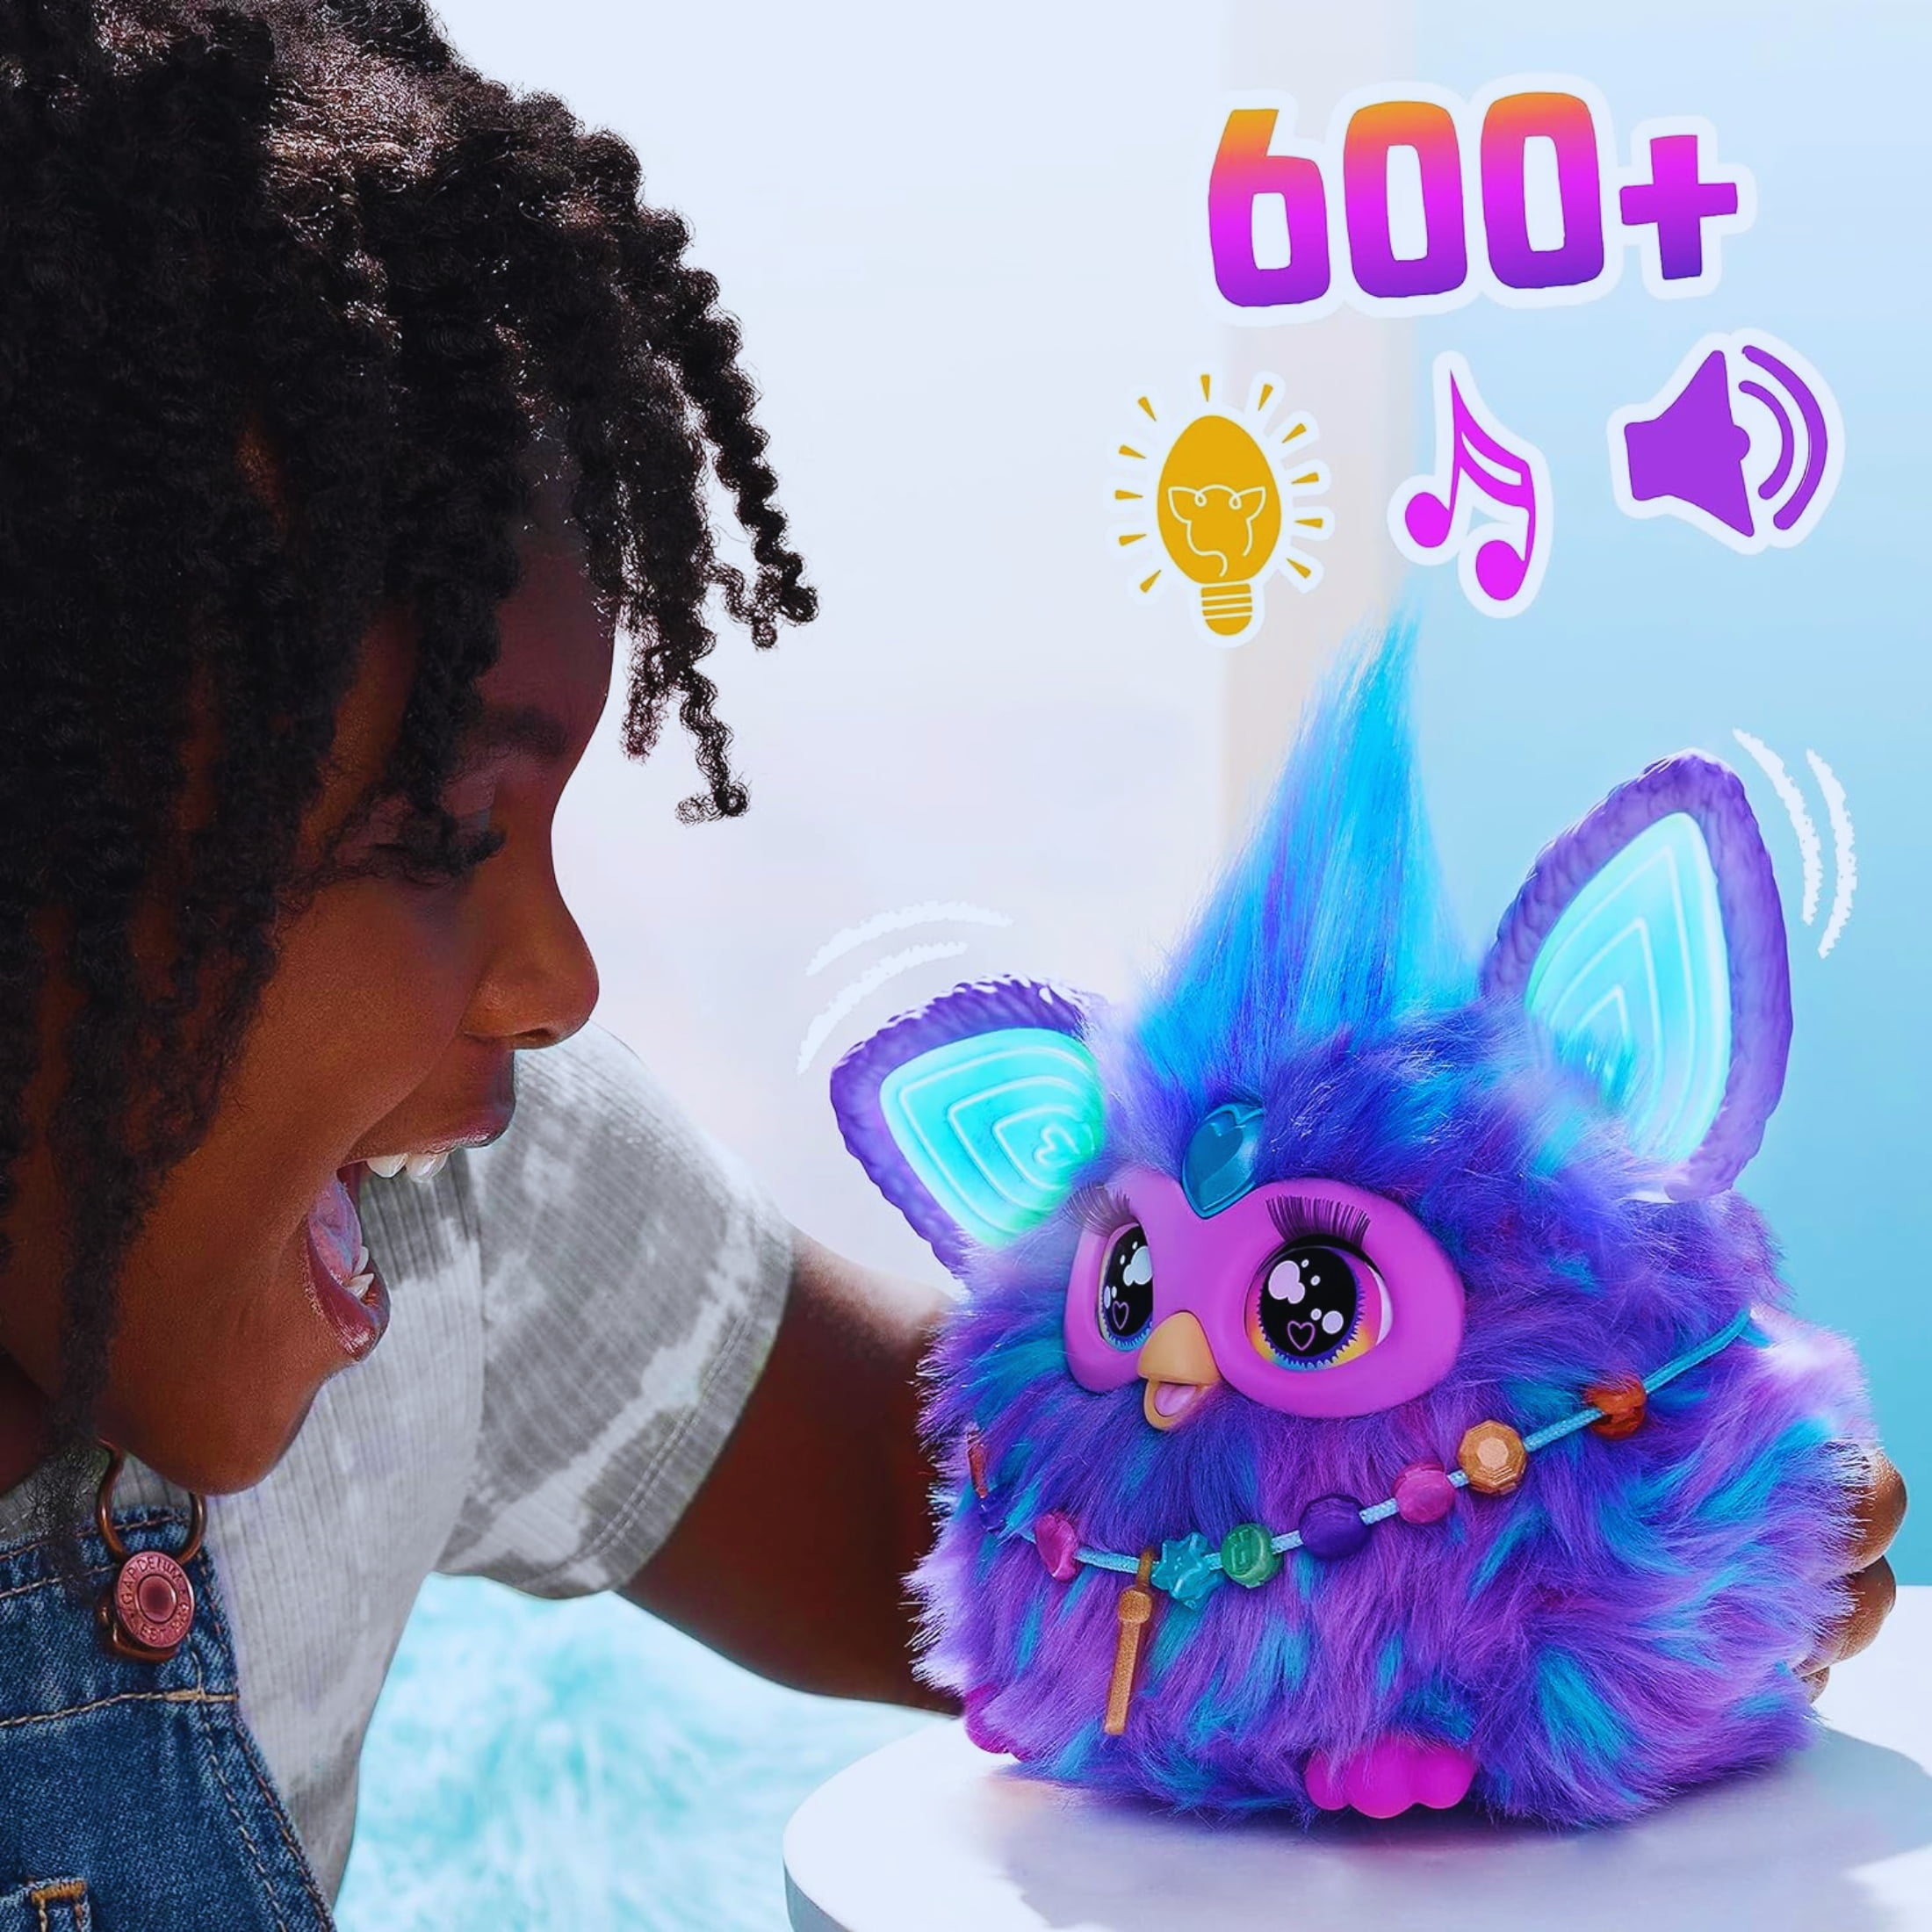  Furby Coral, 15 Fashion Accessories, Interactive Plush Toys for  6 Year Old Girls & Boys & Up, Voice Activated Animatronic : Toys & Games